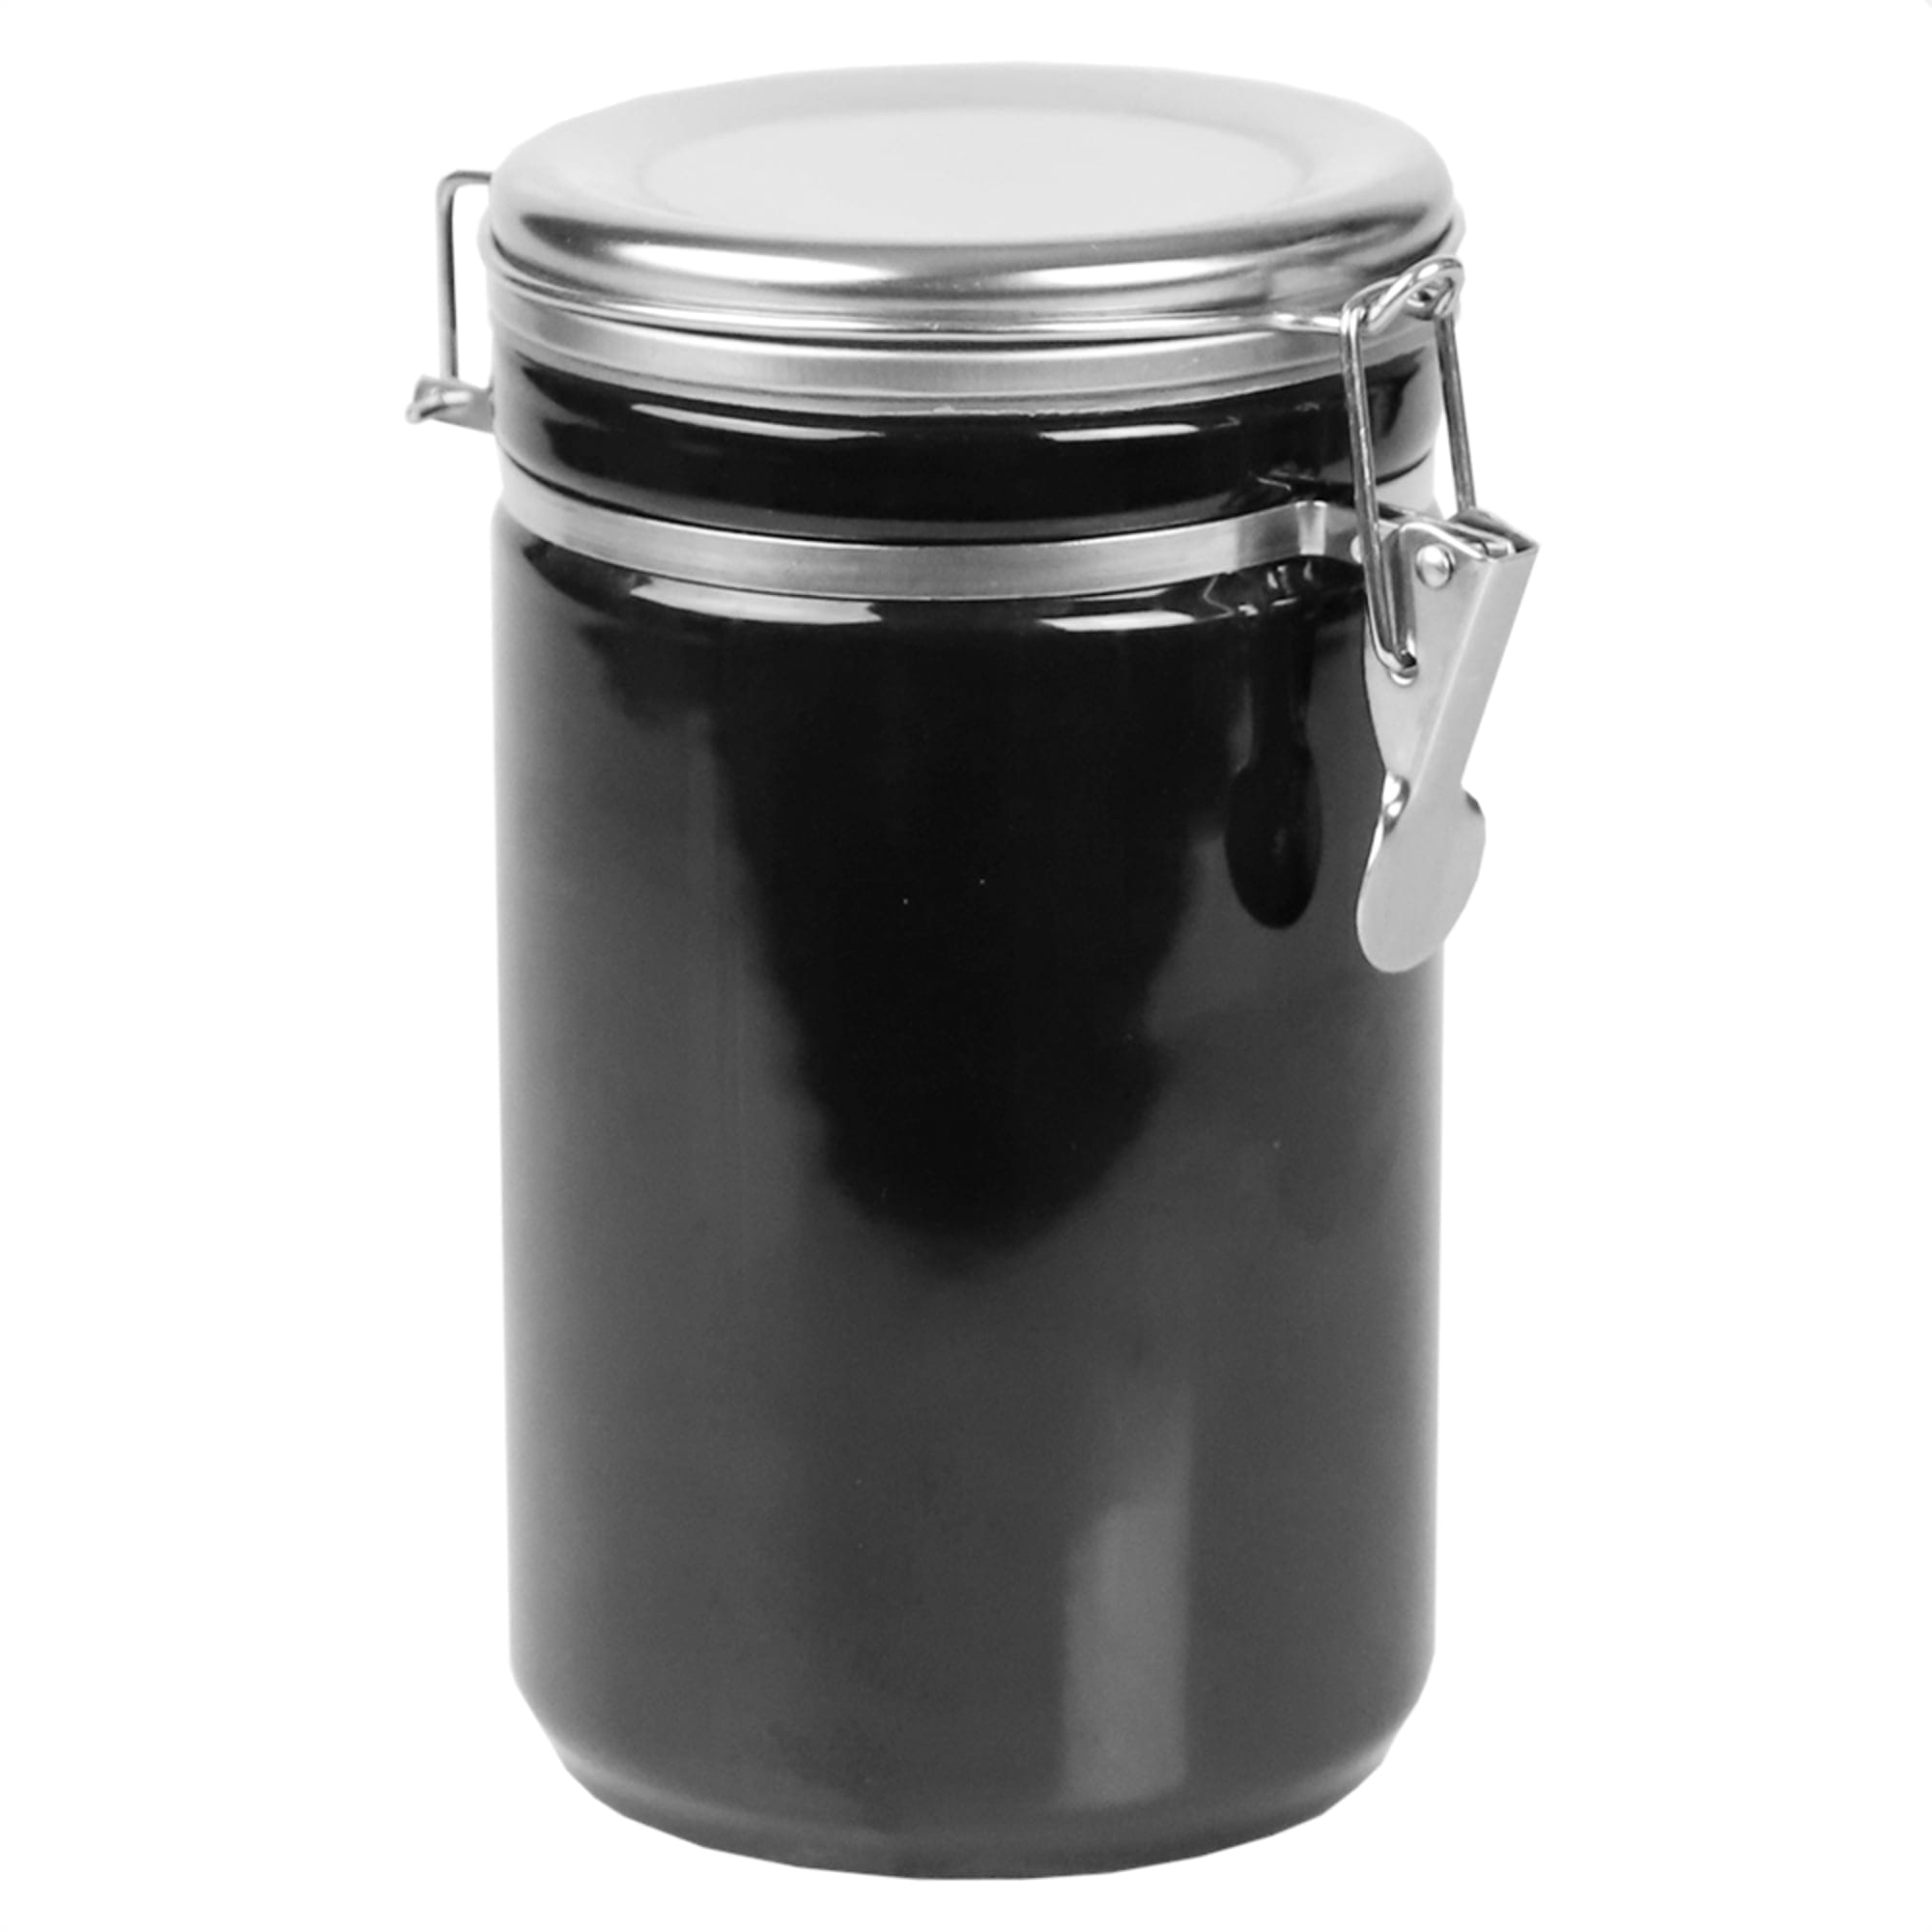 Home Basics 45 oz. Canister with Stainless Steel Top, Black $8.00 EACH, CASE PACK OF 8